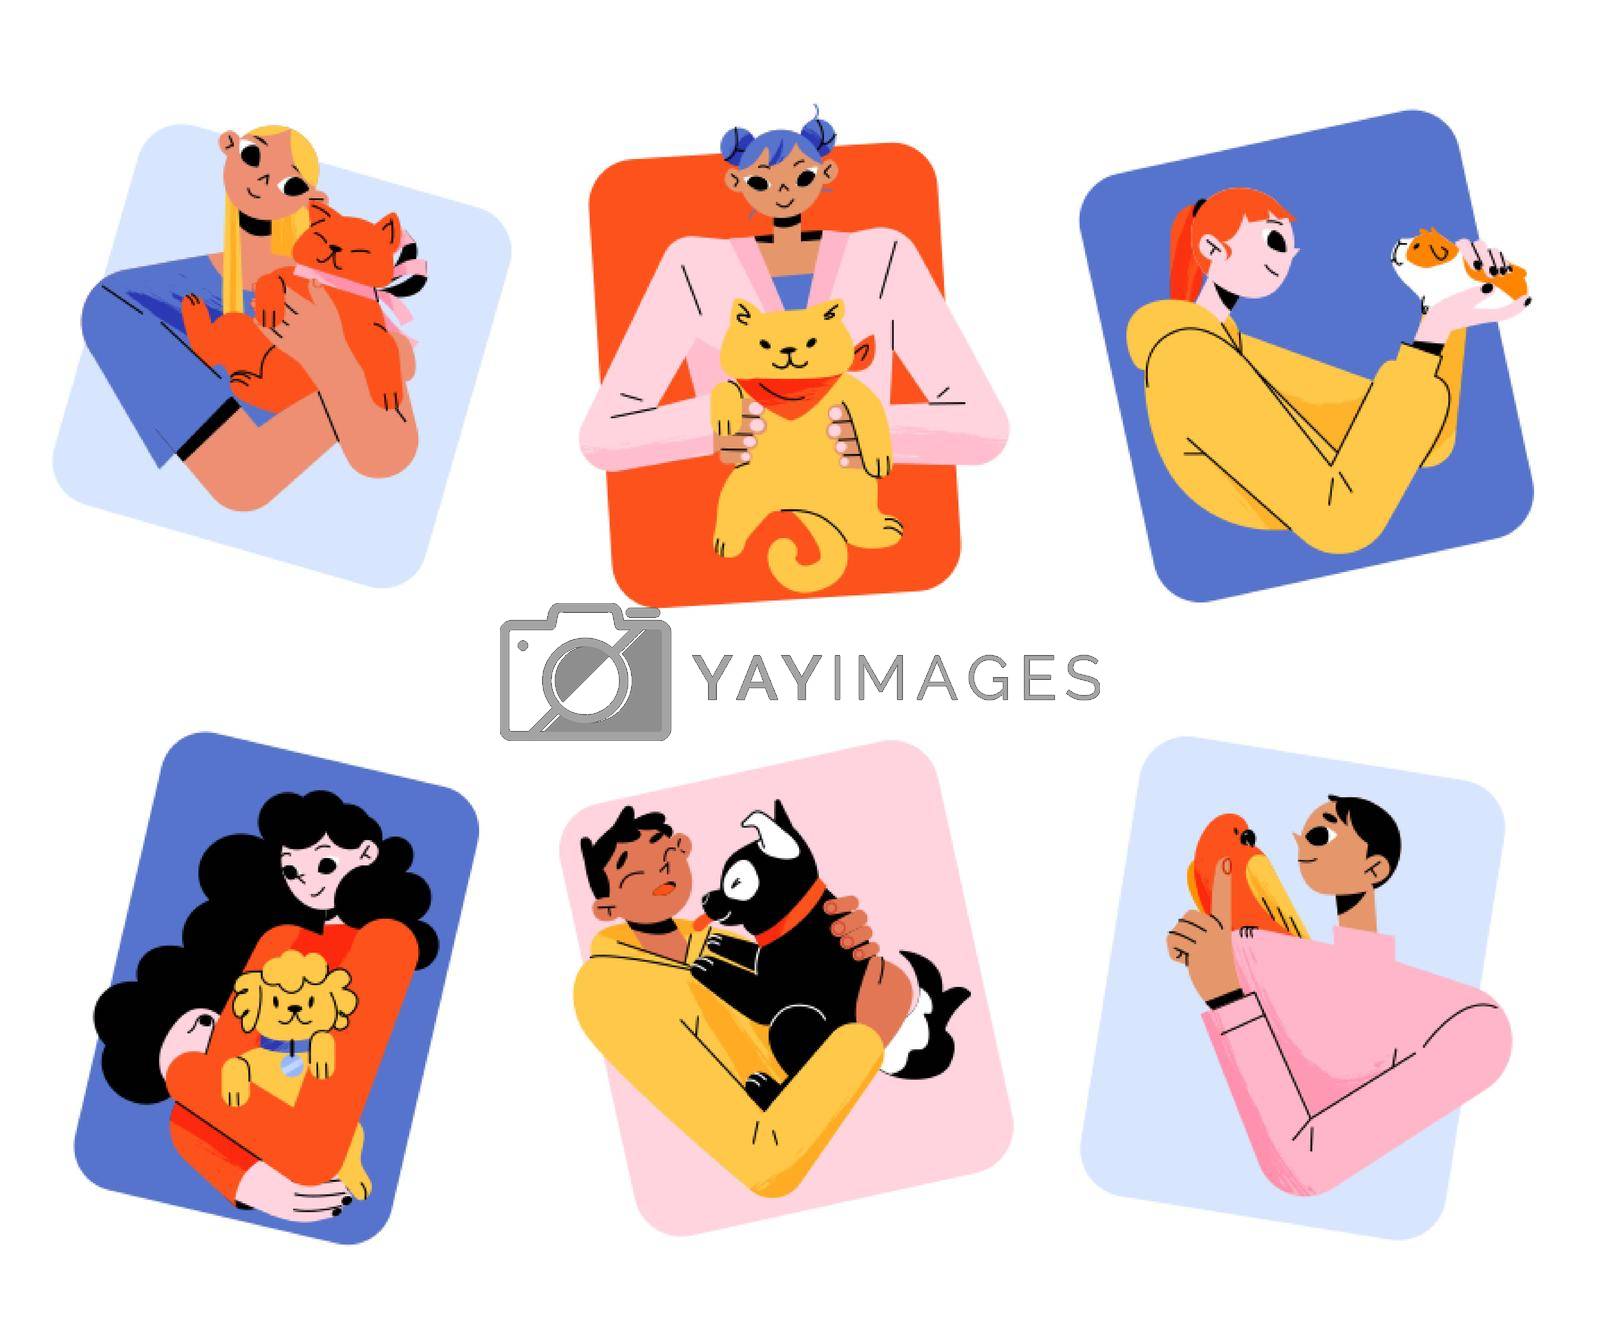 People hug pets square icons, young men and women holding dog, cat, parrot or guinea pig on hands. Human characters cuddle with home animals. Love, adoption avatars, Linear flat vector illustration